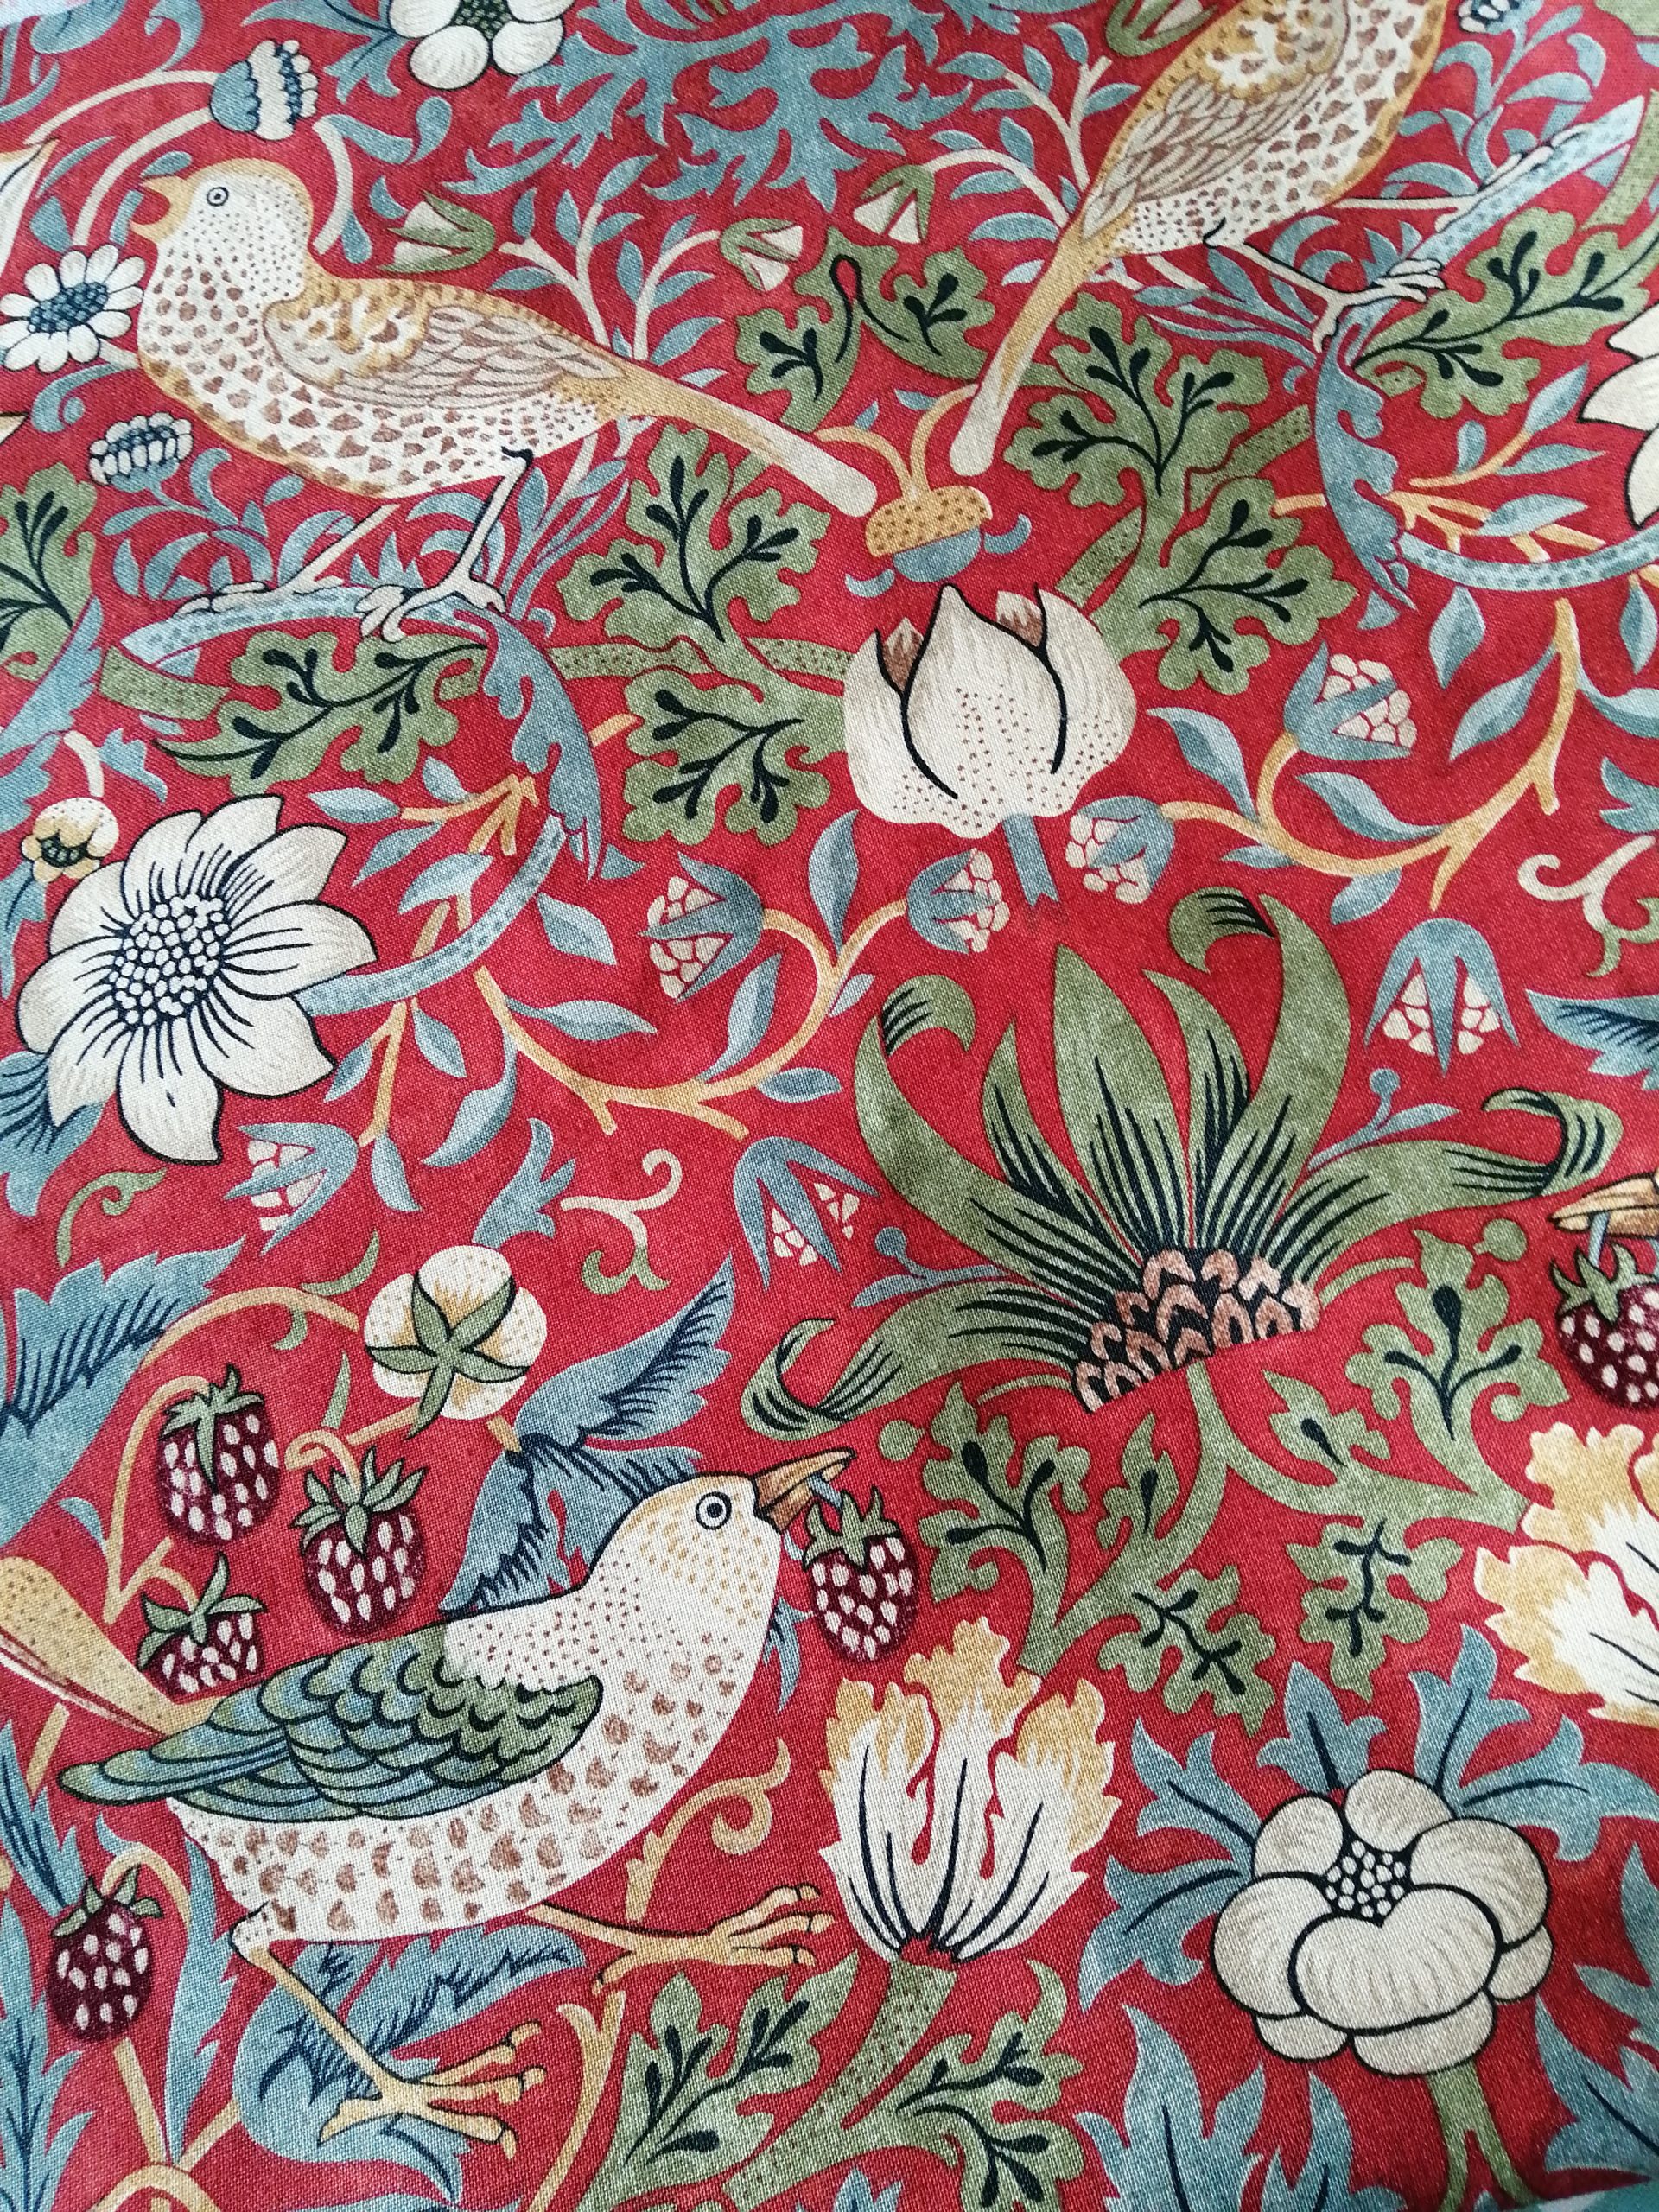 What Was William Morris Style - www.inf-inet.com